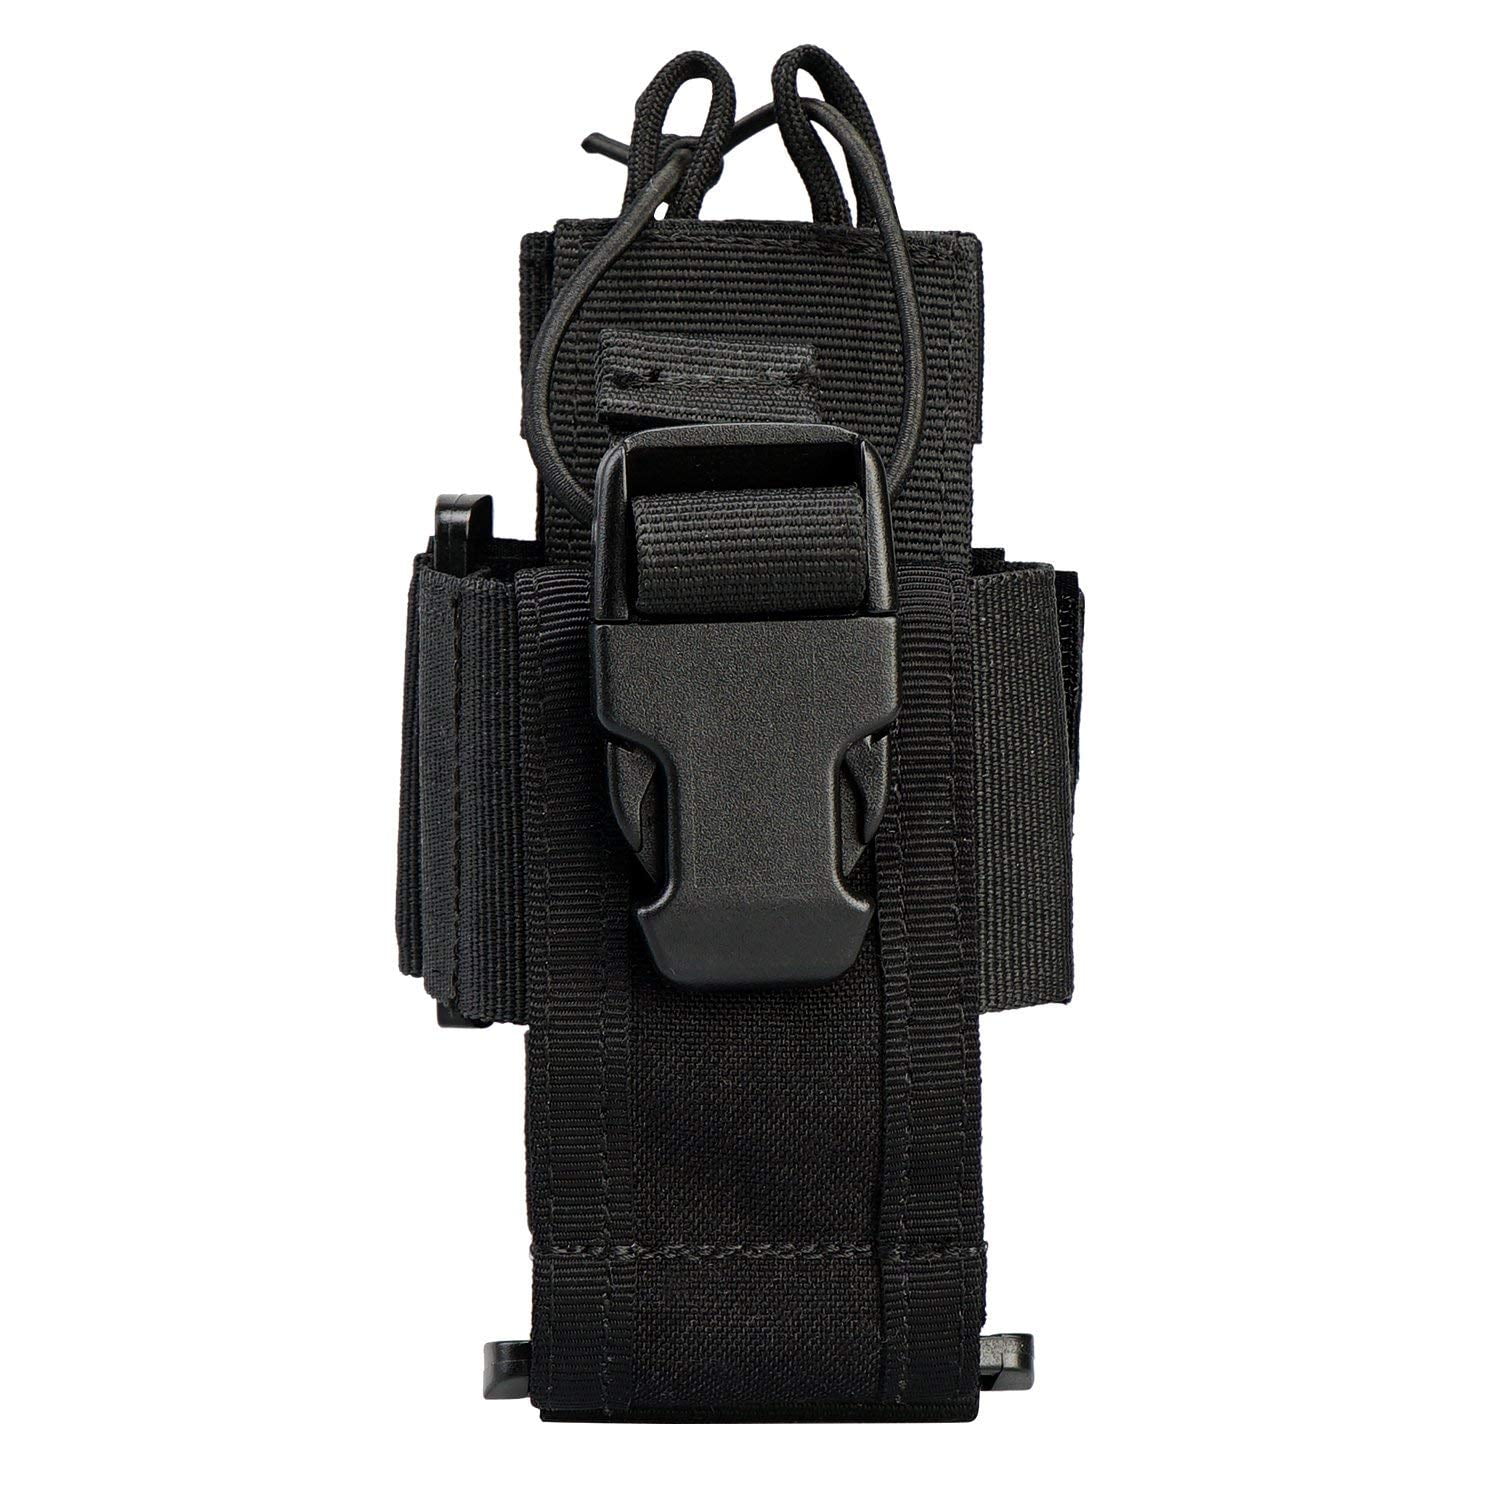 Adjustable Radio Holder Tactical Military Holster Open Top Waist Pouch Nylon #ur 